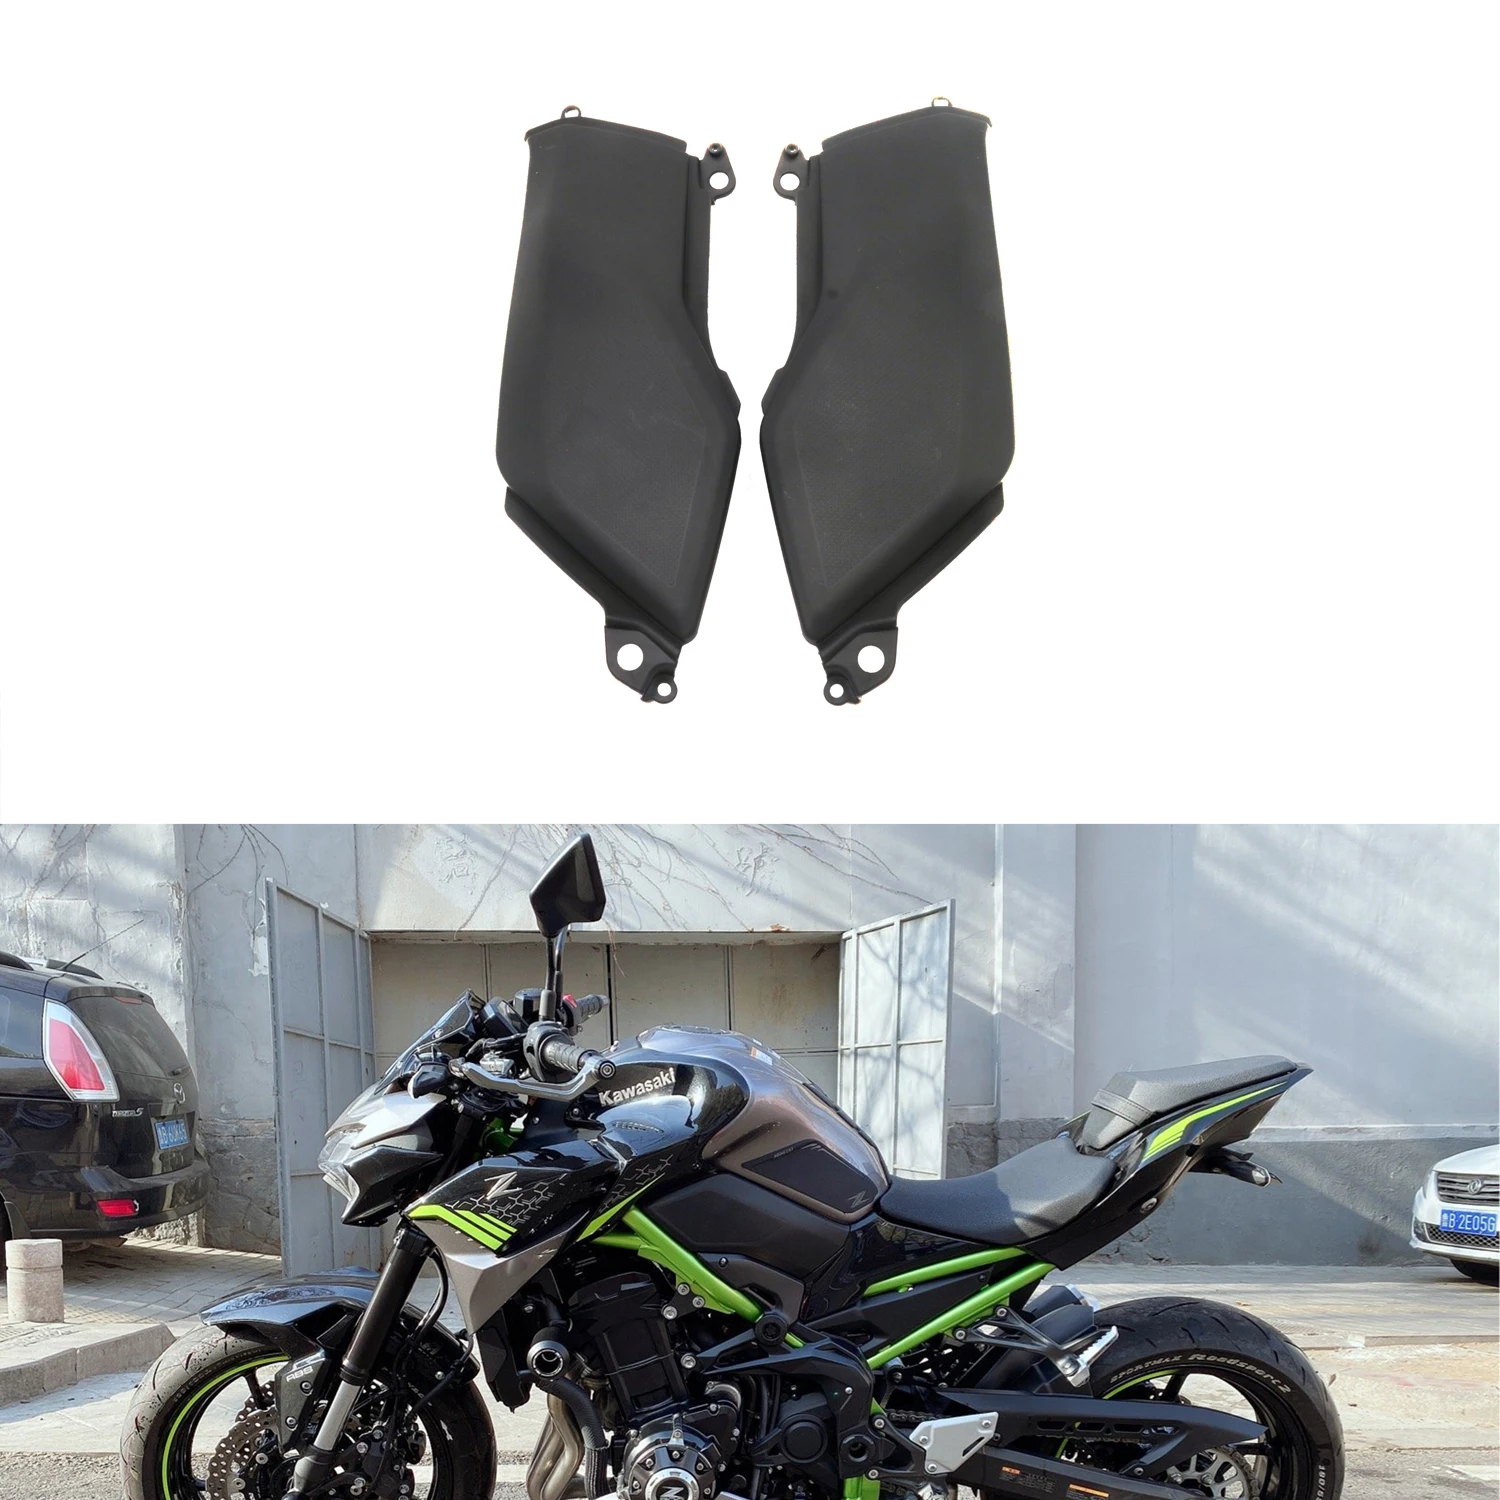 

Motorcycle Unpainted Gas Tank Unit Cover For Z900 2017 2018